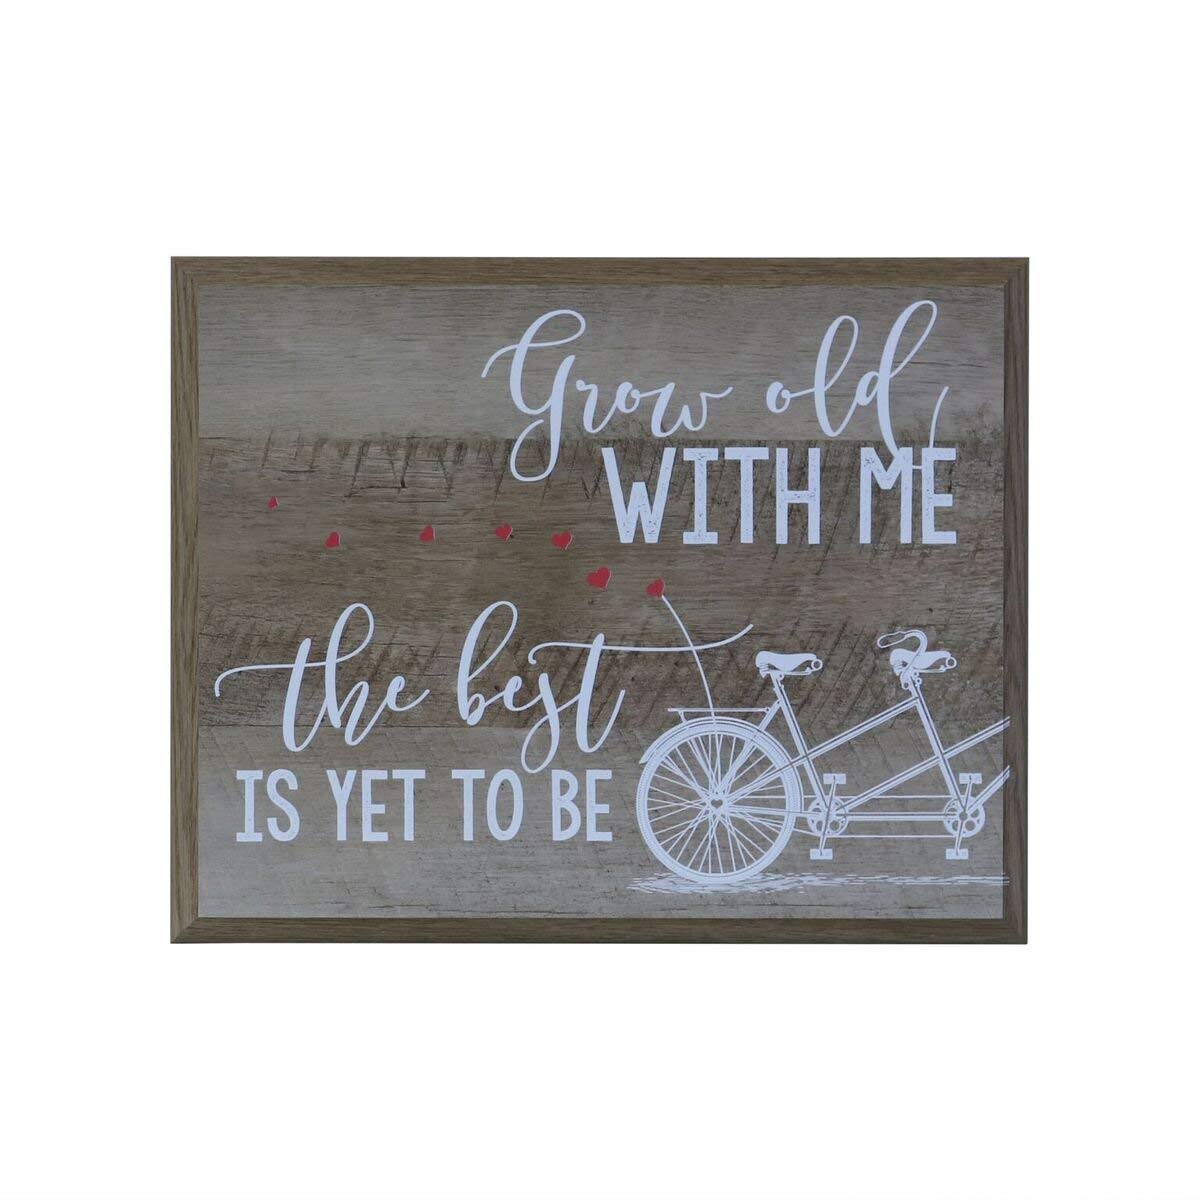 12 x 15 Wall Plaque Decor - Grow Old With Me - LifeSong Milestones